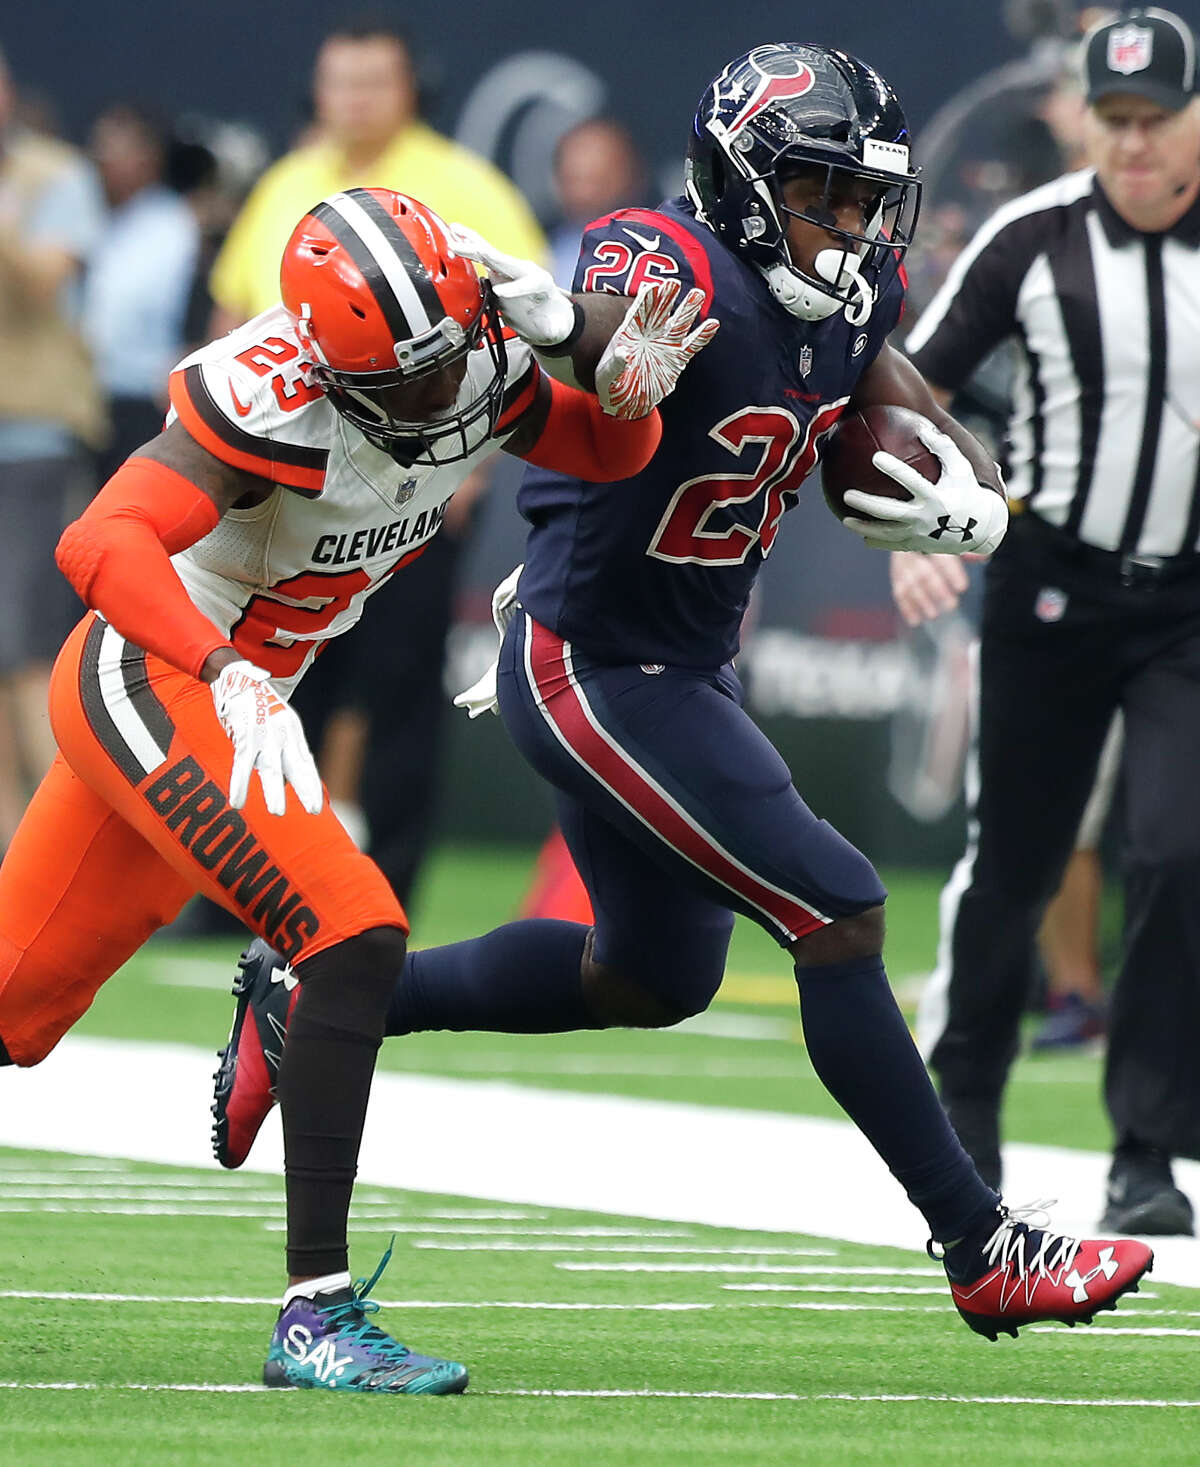 Houston Texans running back Lamar Miller (26) is chased out of bounds by Cleveland Browns strong safety Damarious Randall (23) during the third quarter of an NFL football game at NRG Stadium on Sunday, Dec. 2, 2018, in Houston.